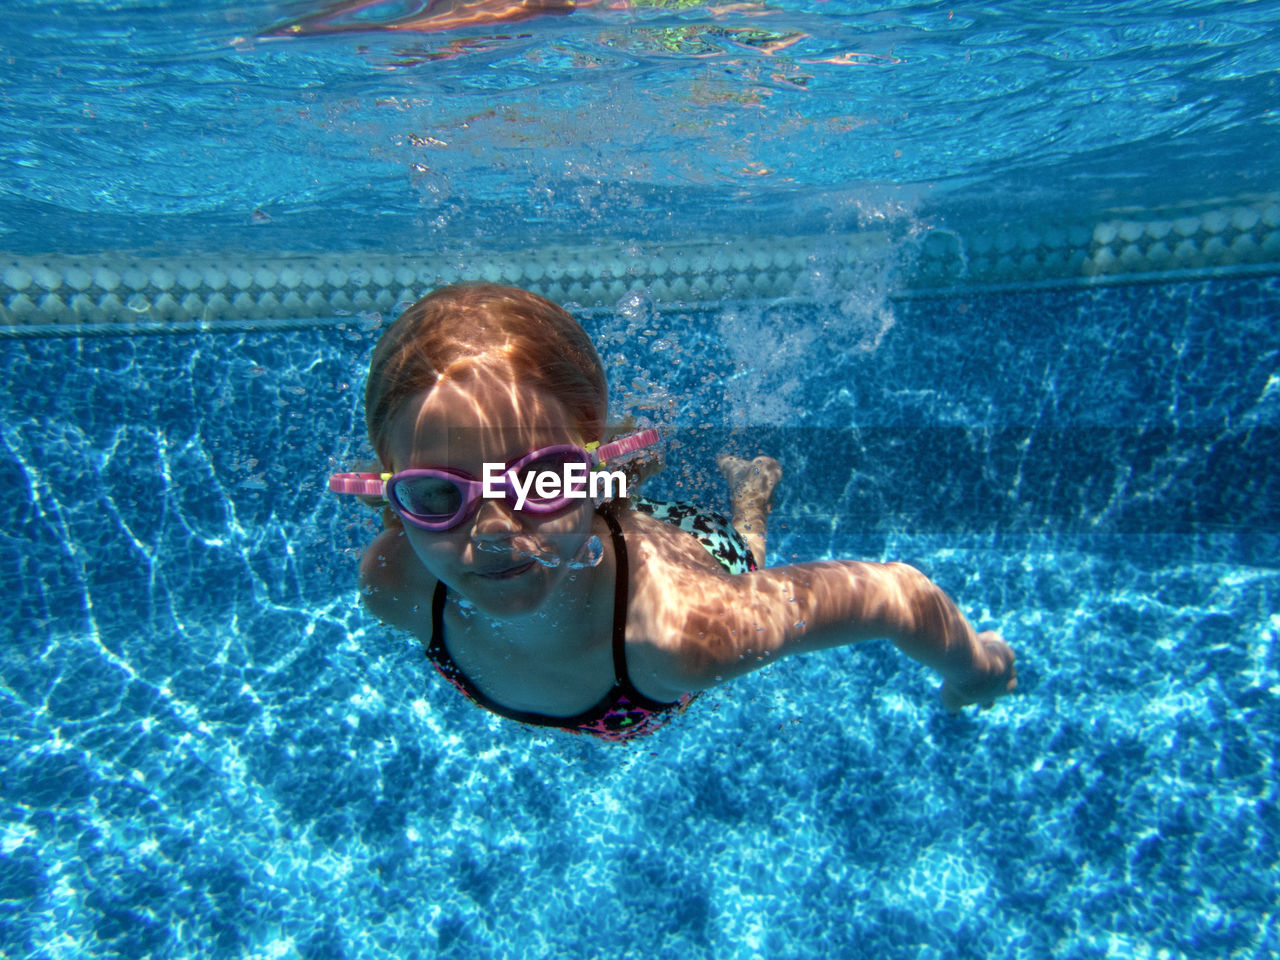 Girl swimming underwater with goggles on